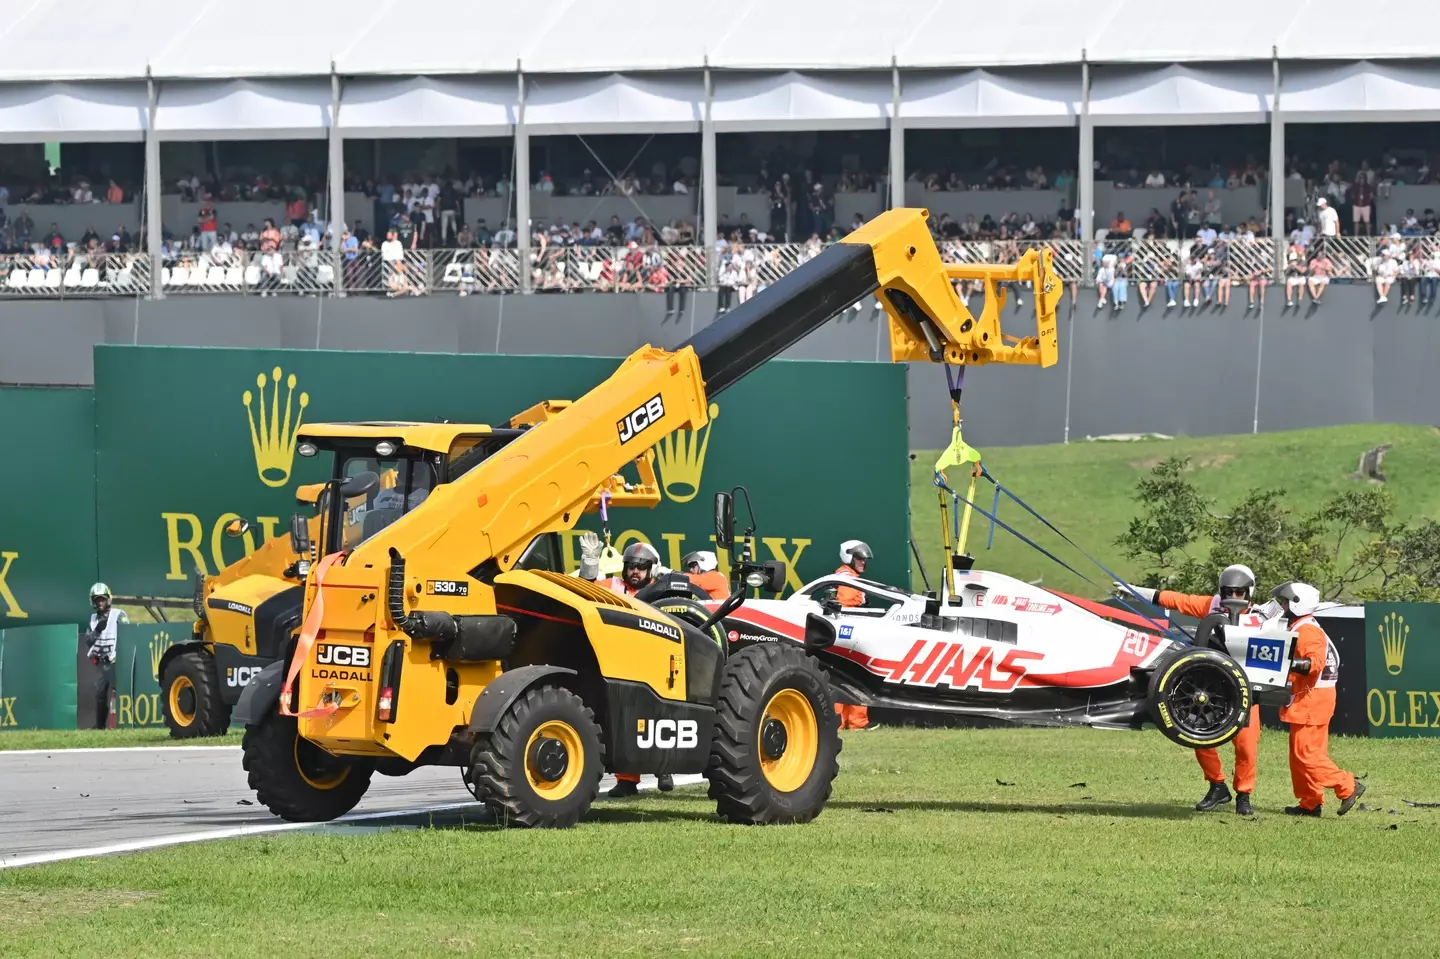 Kevin Magnussen's Haas F1 car being recovered following his crash. (